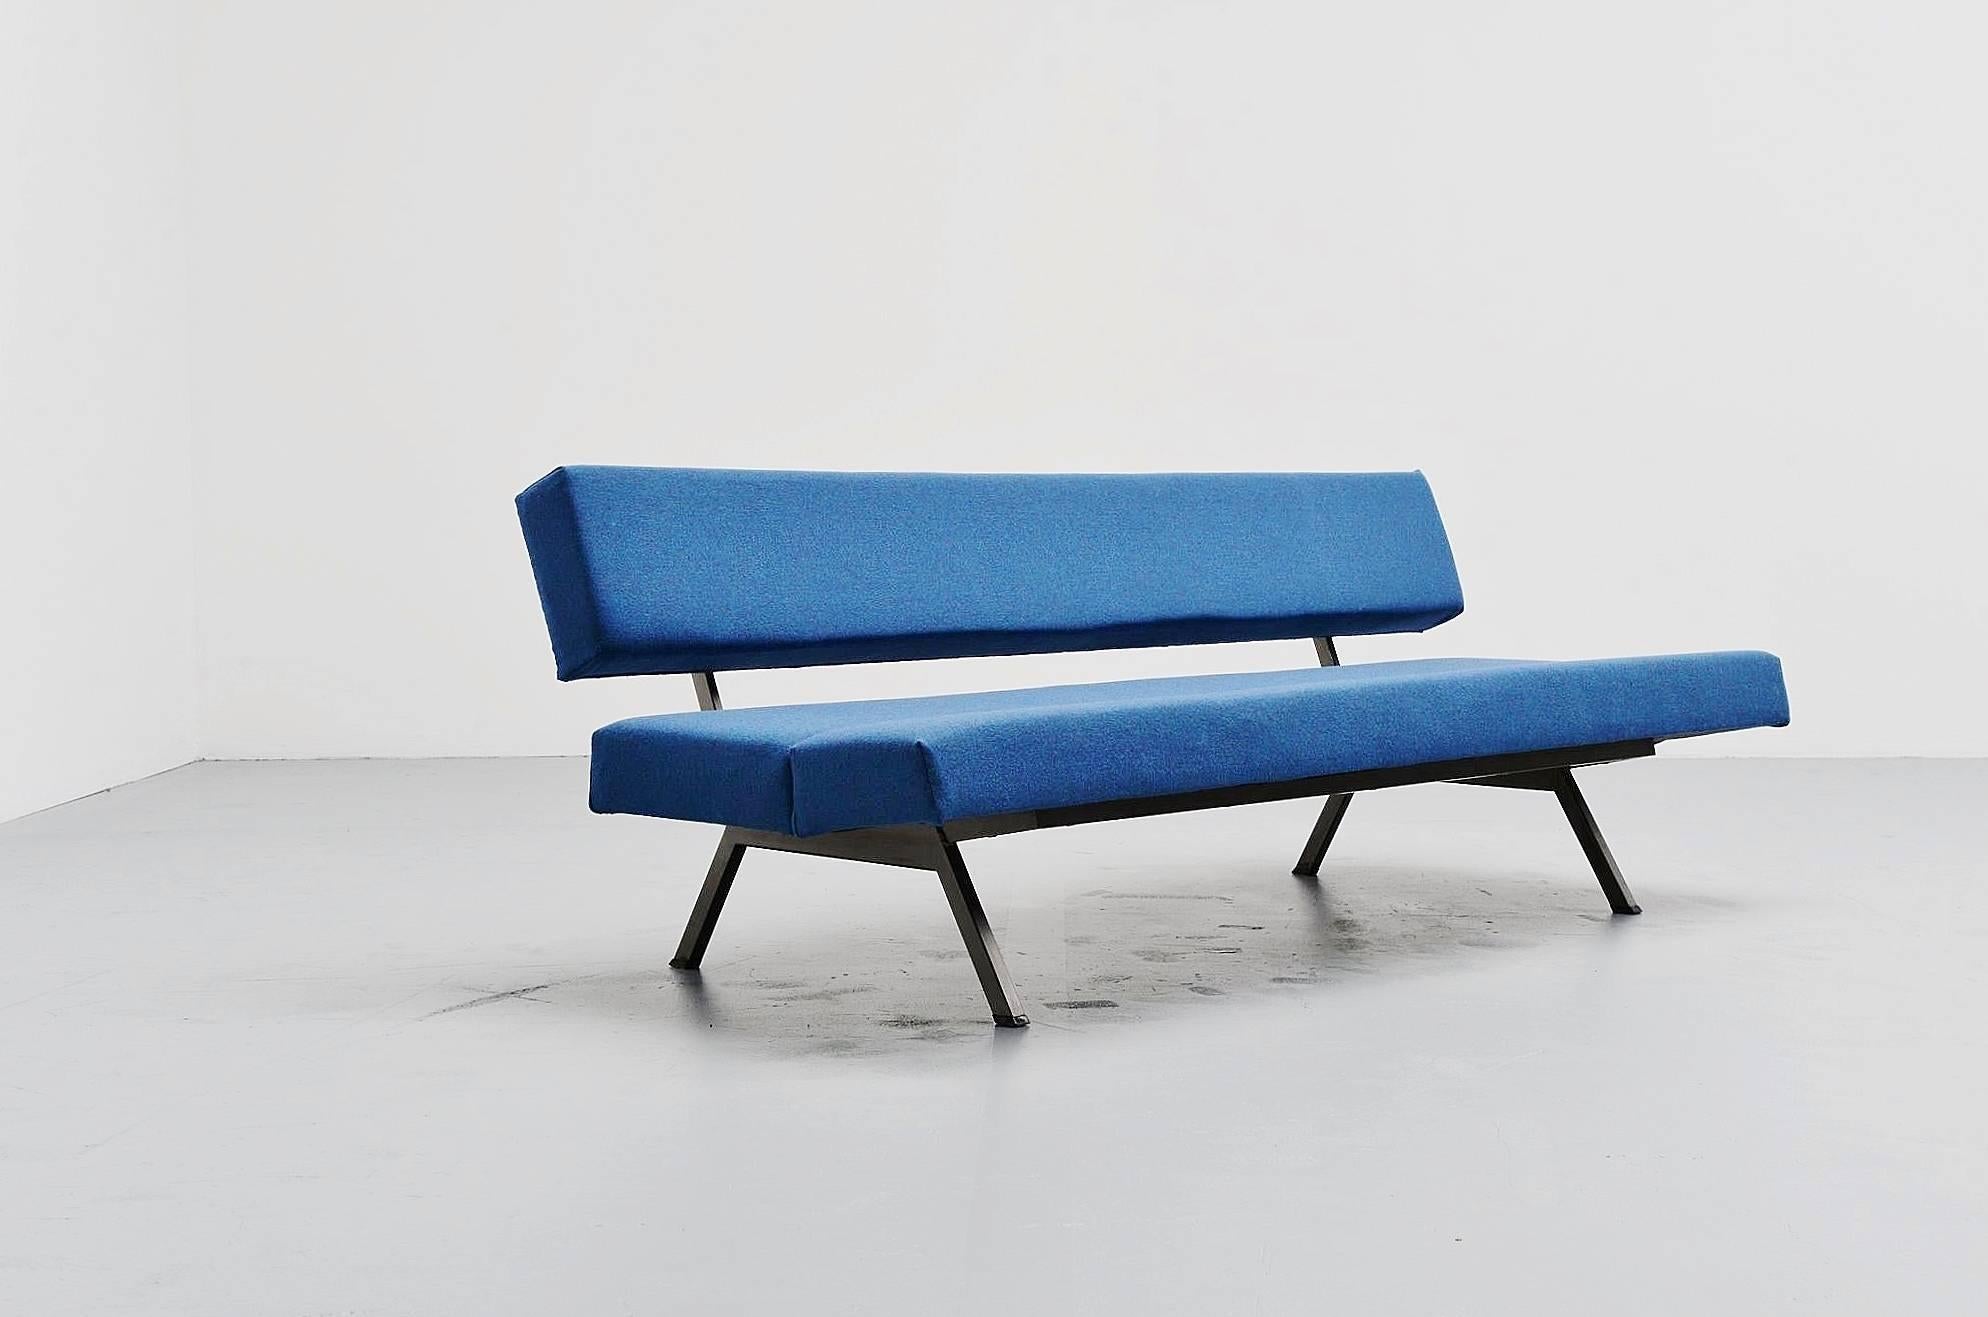 Fantastic shaped and made daybed sofa made by unknown manufacturer in Holland, 1960. This has a metal frame and new blue upholstery by Kvadrat, this is the fabric called Flora-2 786. This fabric is designed by Erik Ole Jorgensen, high quality and